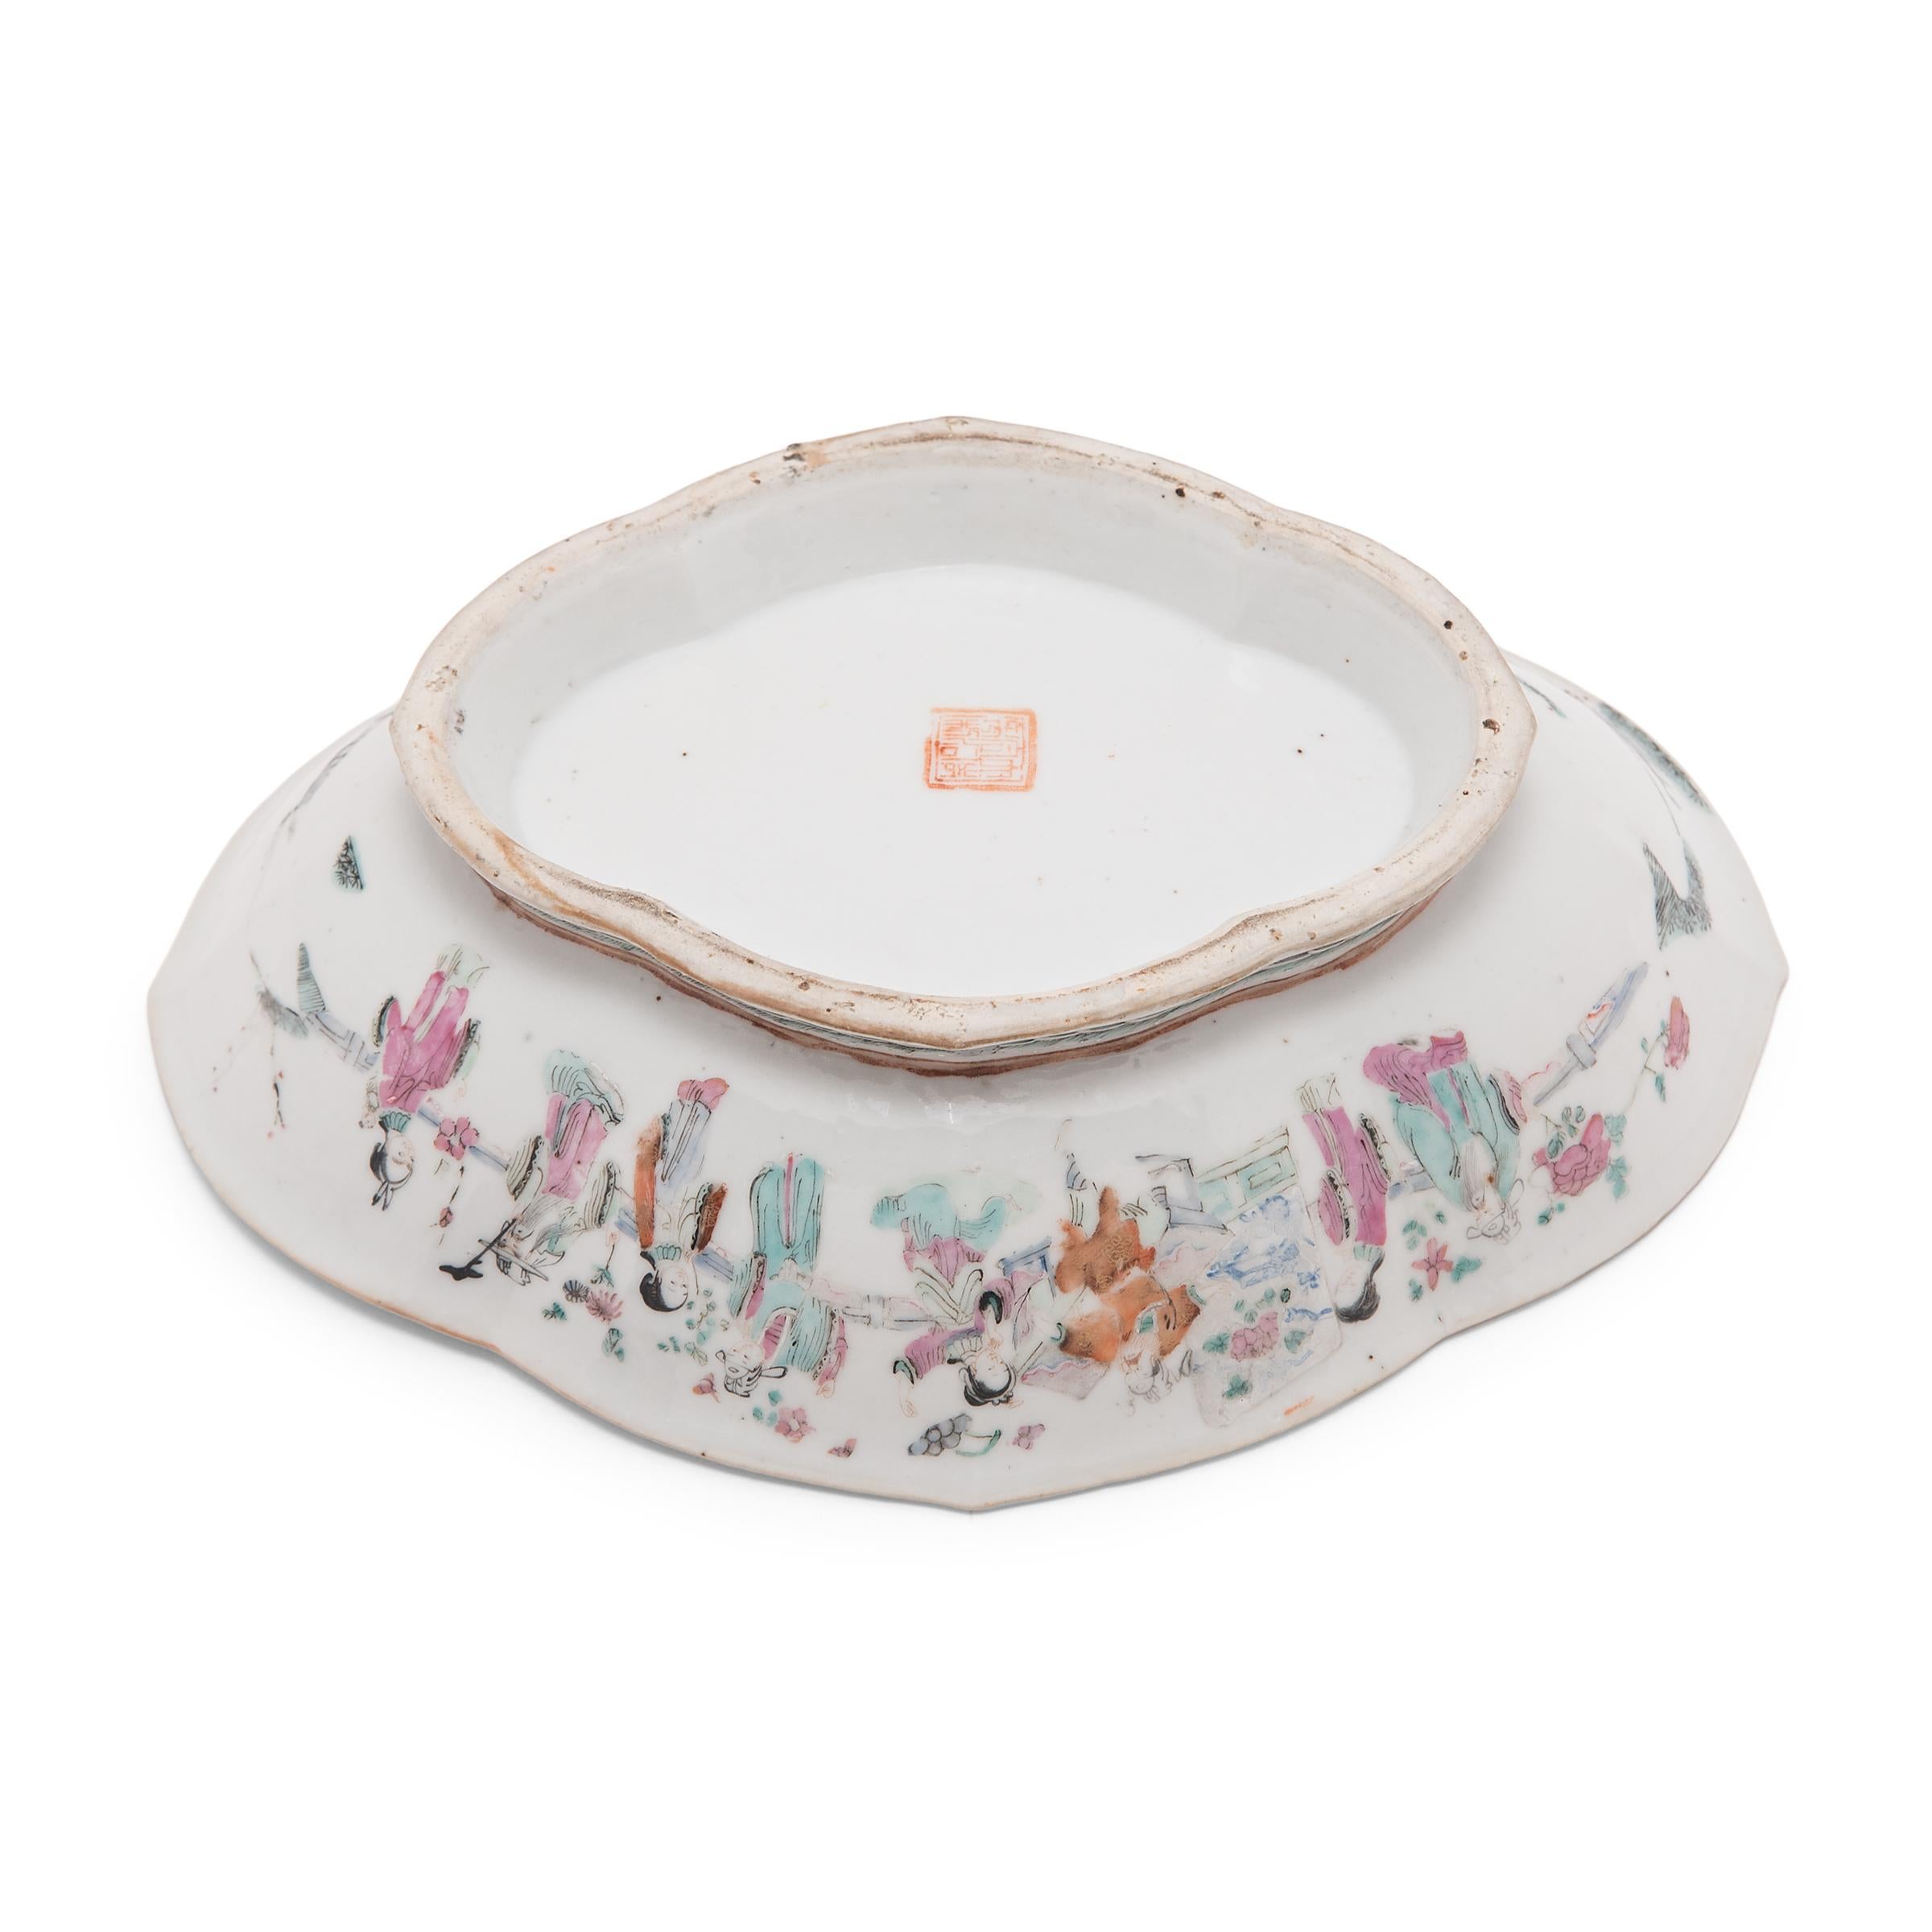 Porcelain Chinese Famille Rose Footed Offering Bowl, c. 1850